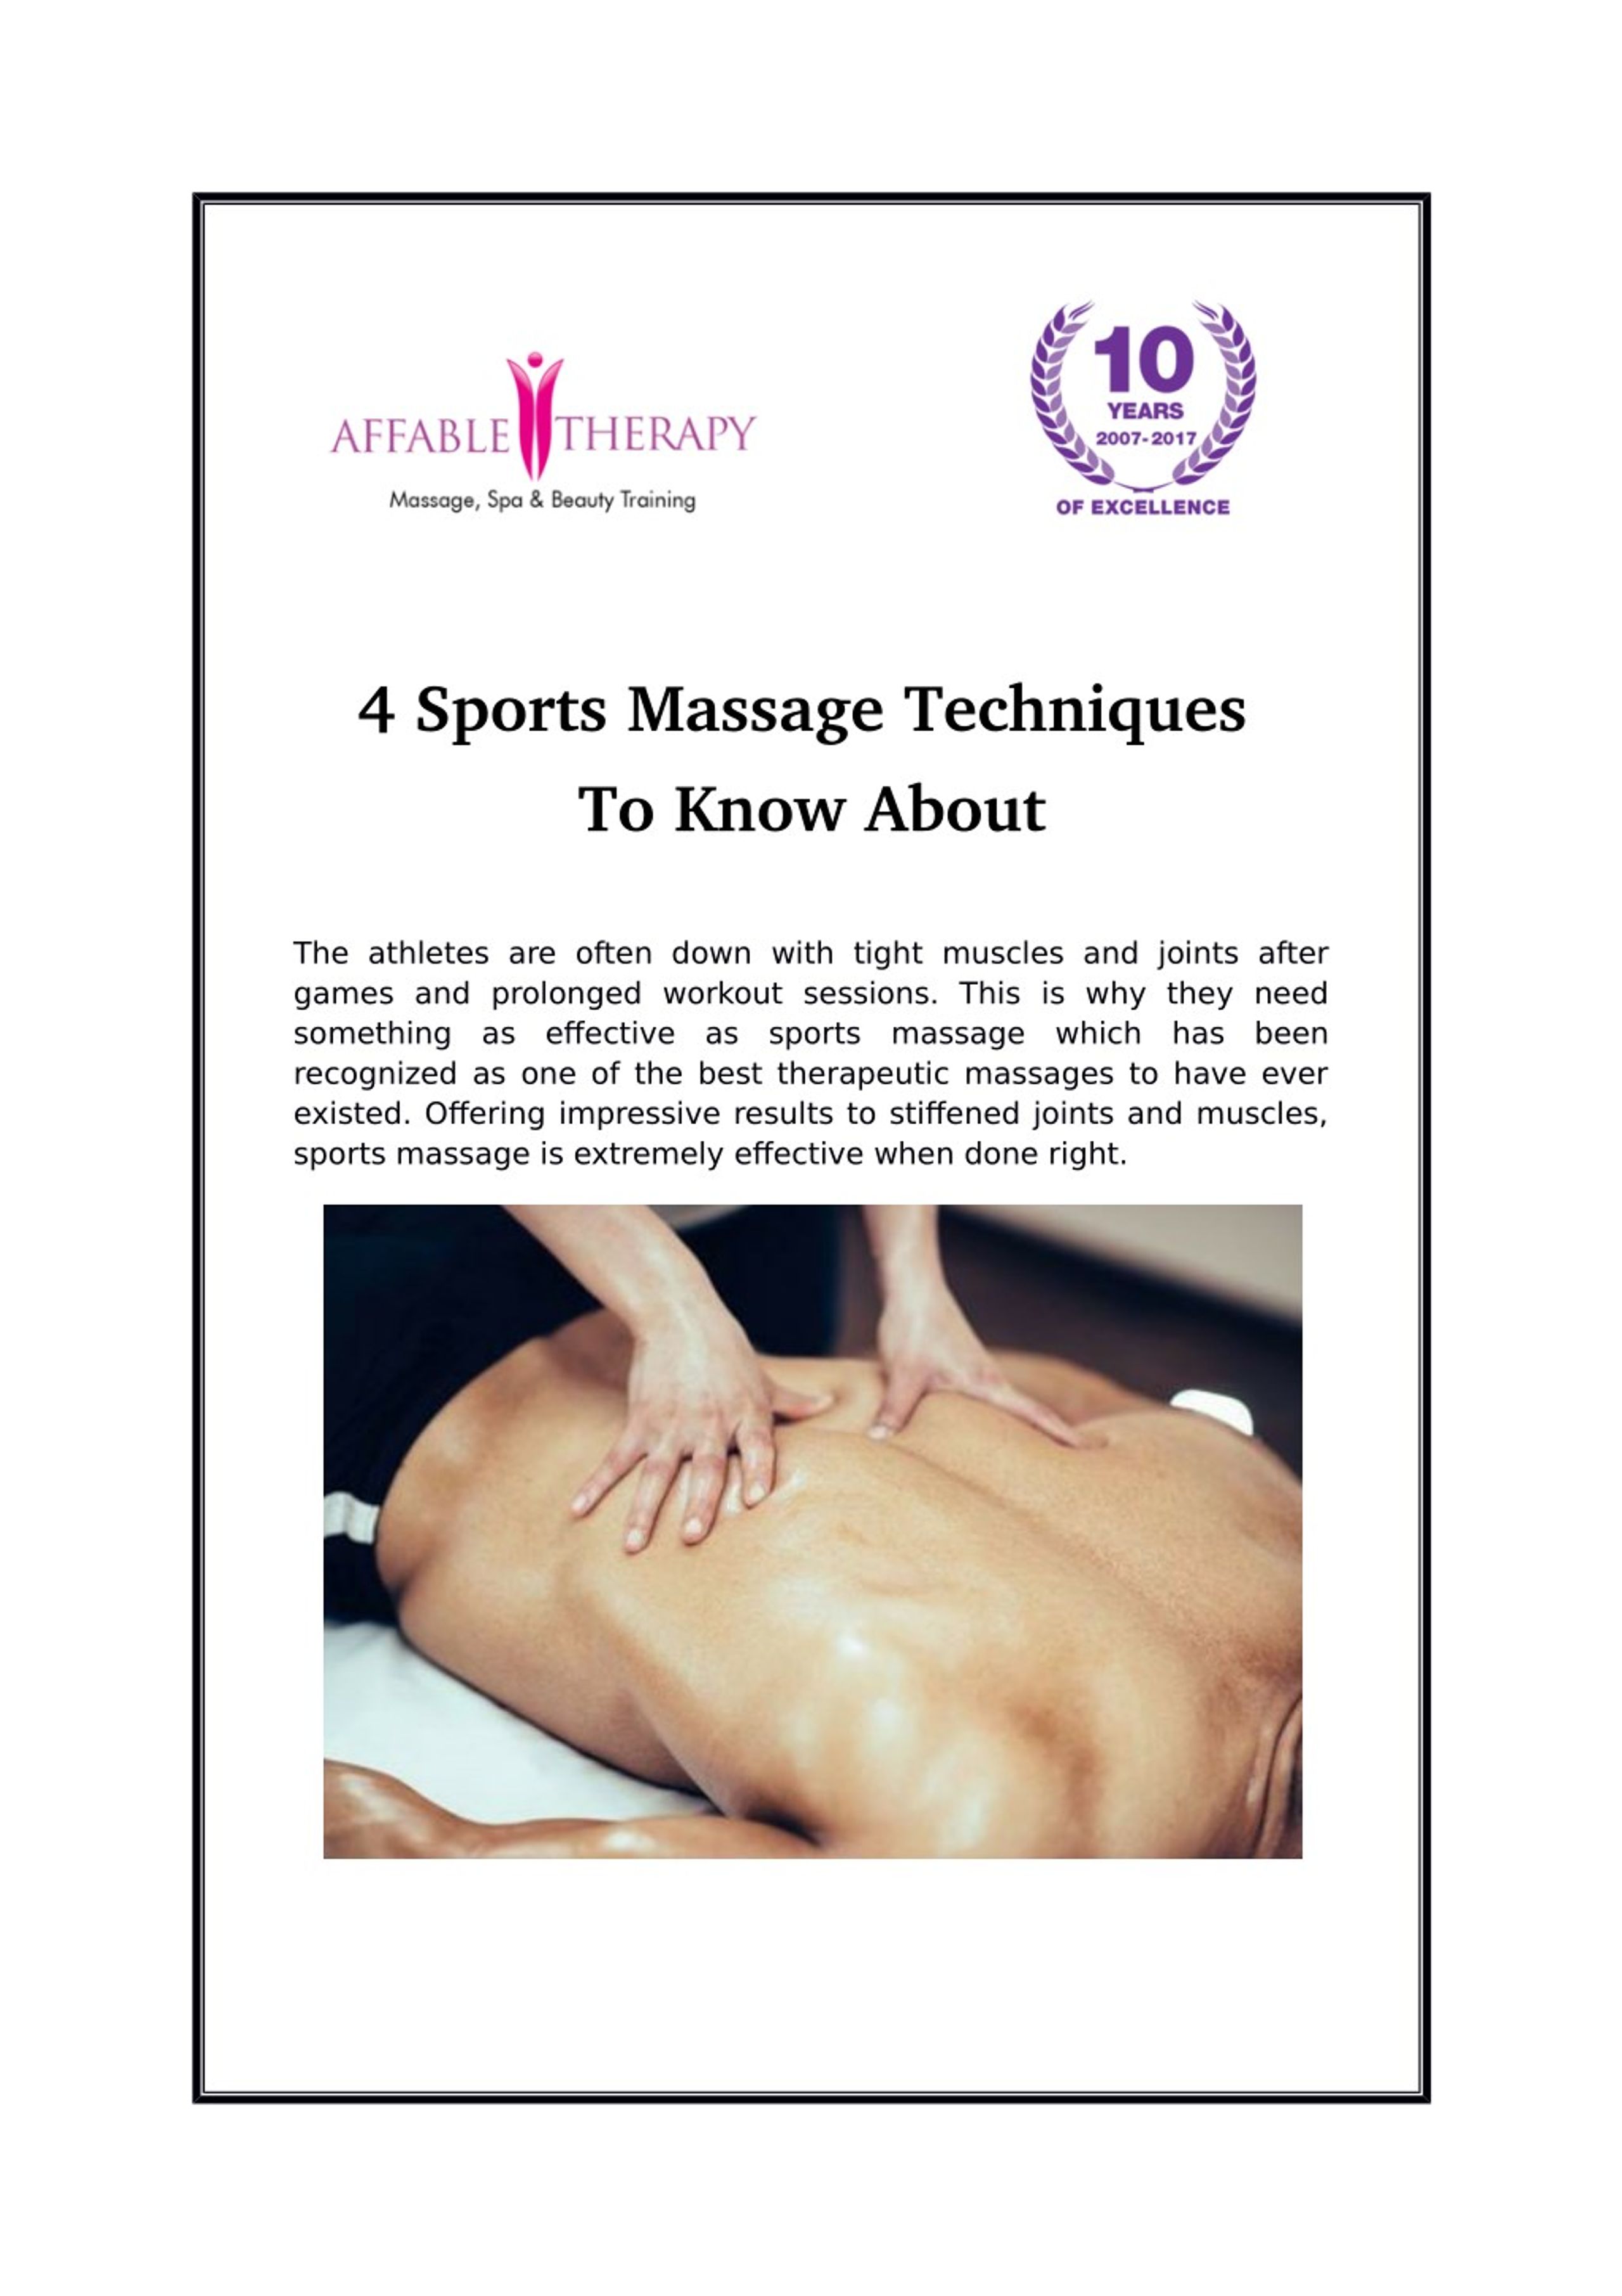 Ppt 4 Sports Massage Techniques To Know About Powerpoint Presentation Id 8002962